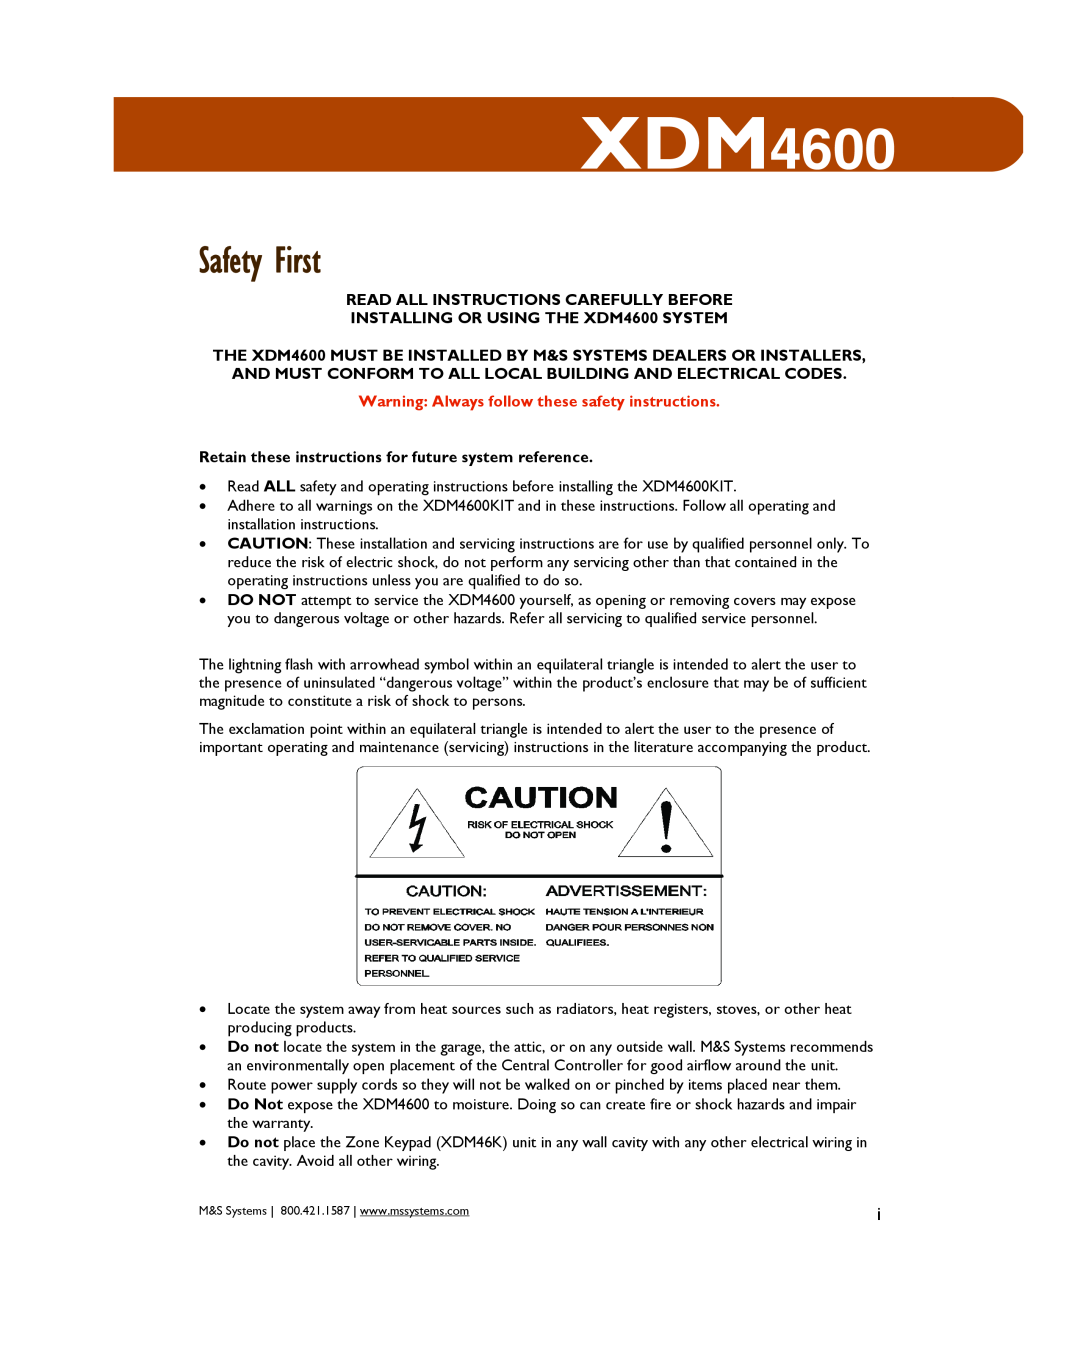 M&S Systems owner manual Safety First, Read All Instructions Carefully Before, INSTALLING OR USING THE XDM4600 SYSTEM 